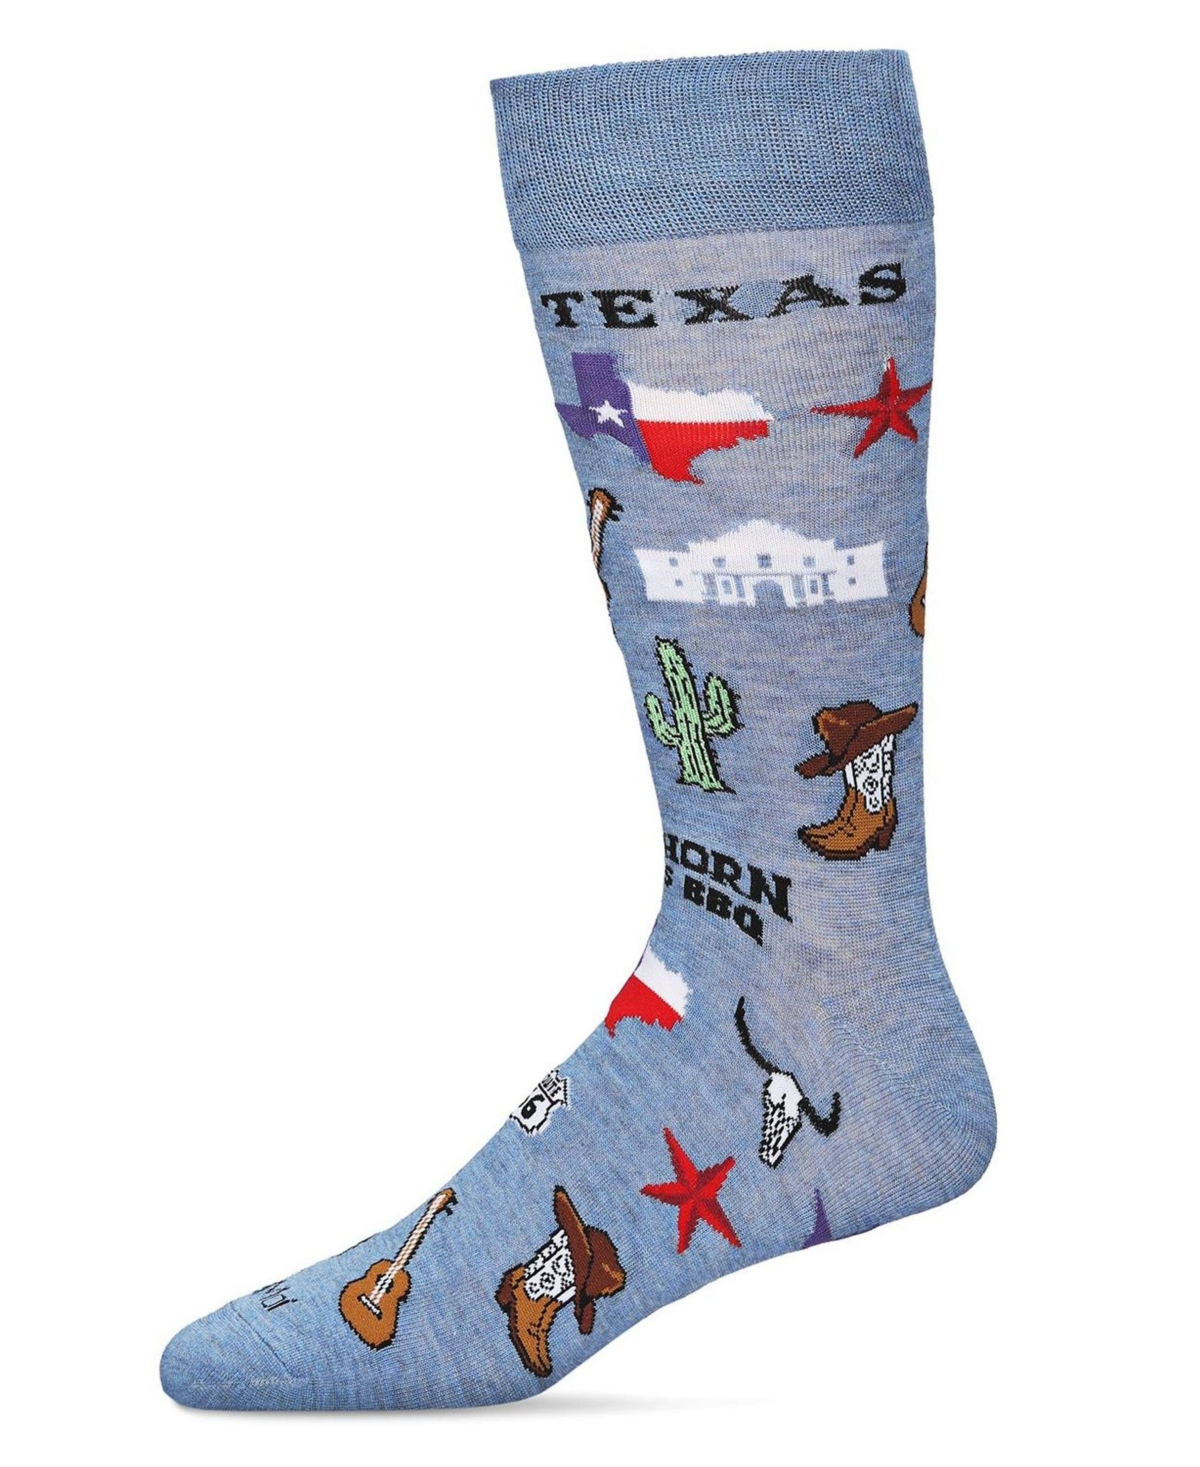 Men's Don't Mess with Texas Rayon from Bamboo Novelty Crew Socks - Denim Heather